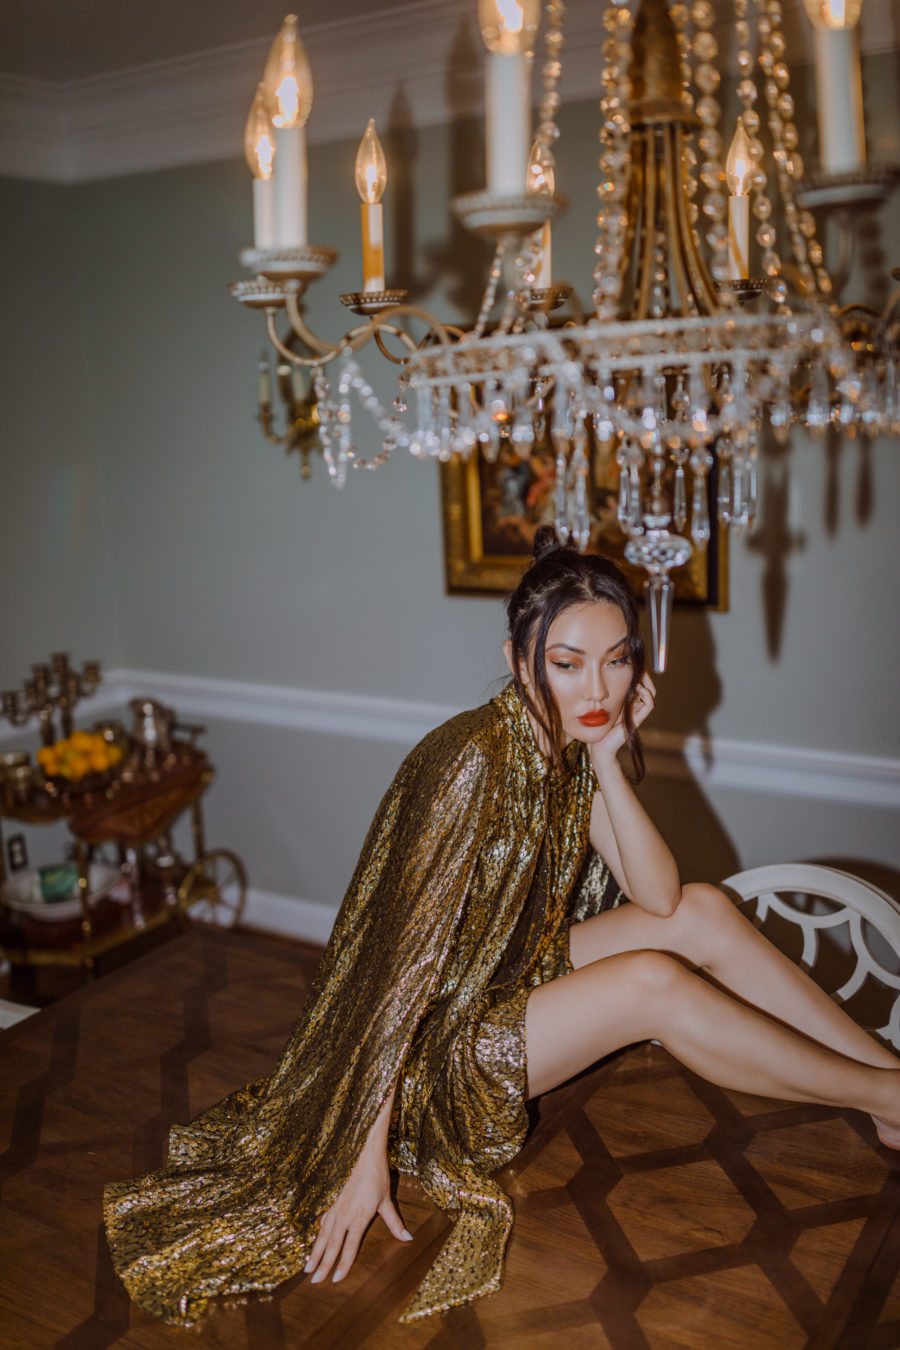 jessica wang wearing a gold dress at home sharing cyber monday deals for 2020 // jessica wang - Notjessfashion.com